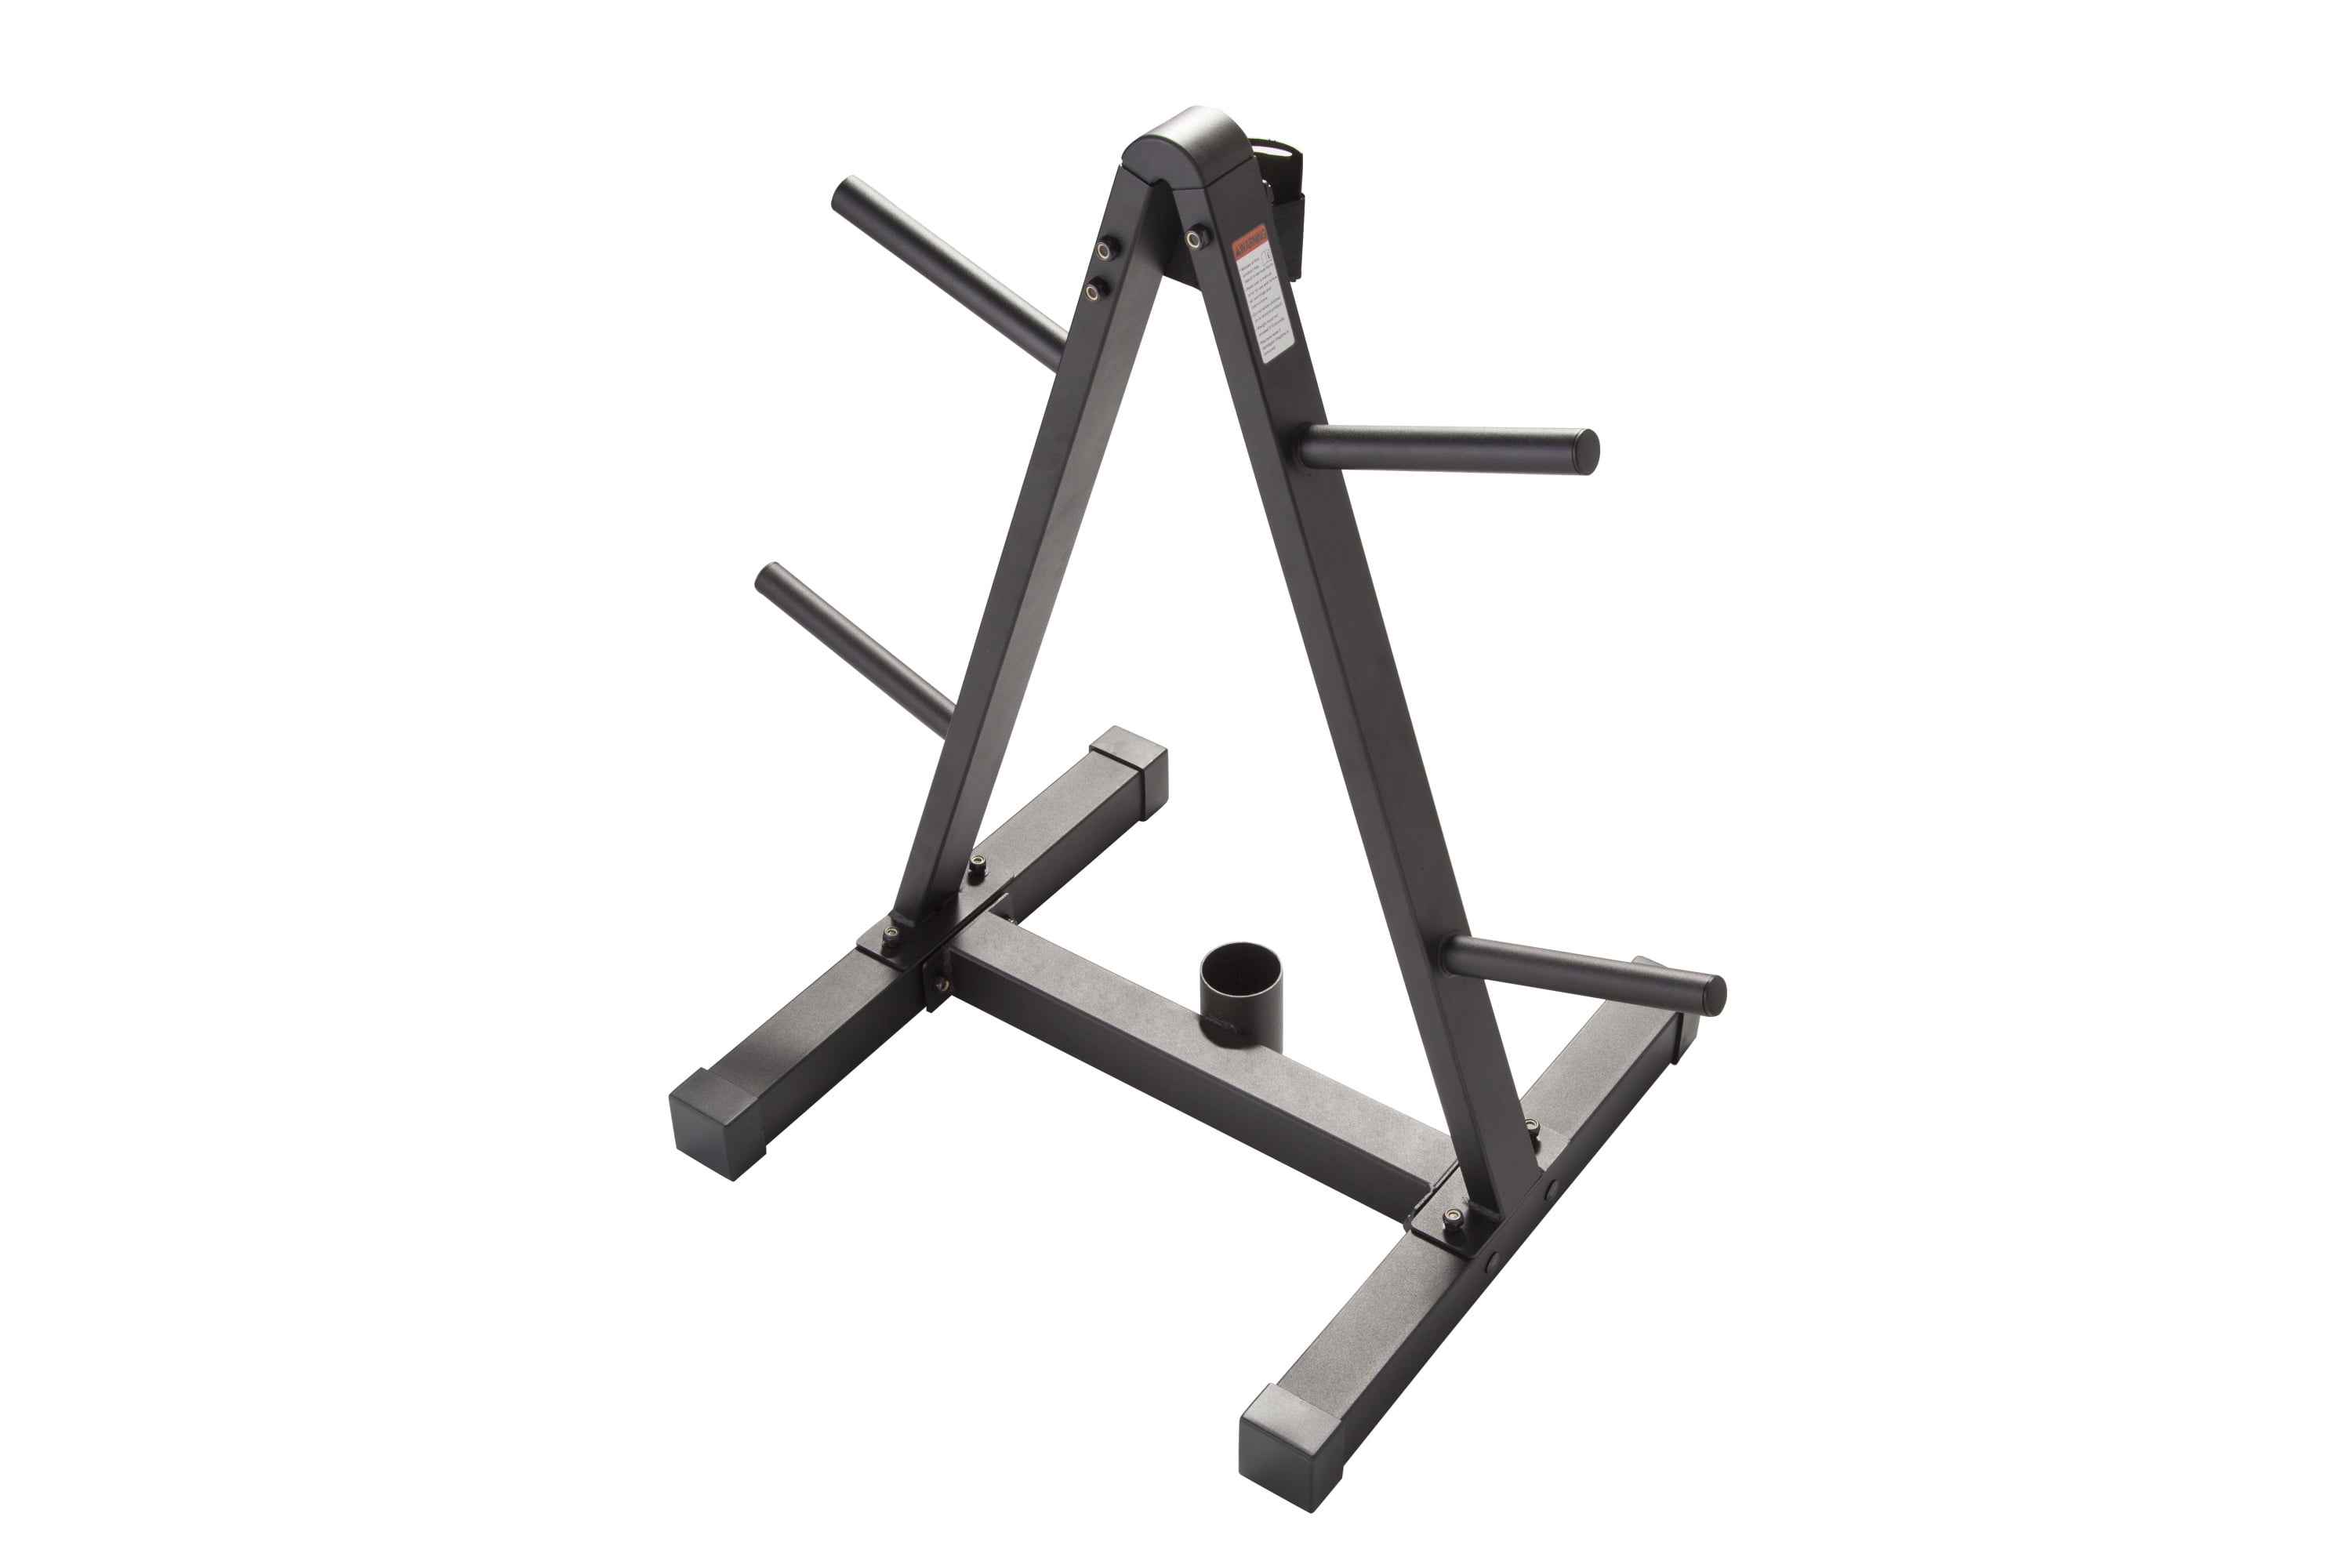 Kettlebells and Weight Plates Per Newly Barbell Olympic Plate Rack Tree Bar Holder Weights Storage Rack for Dumbbells